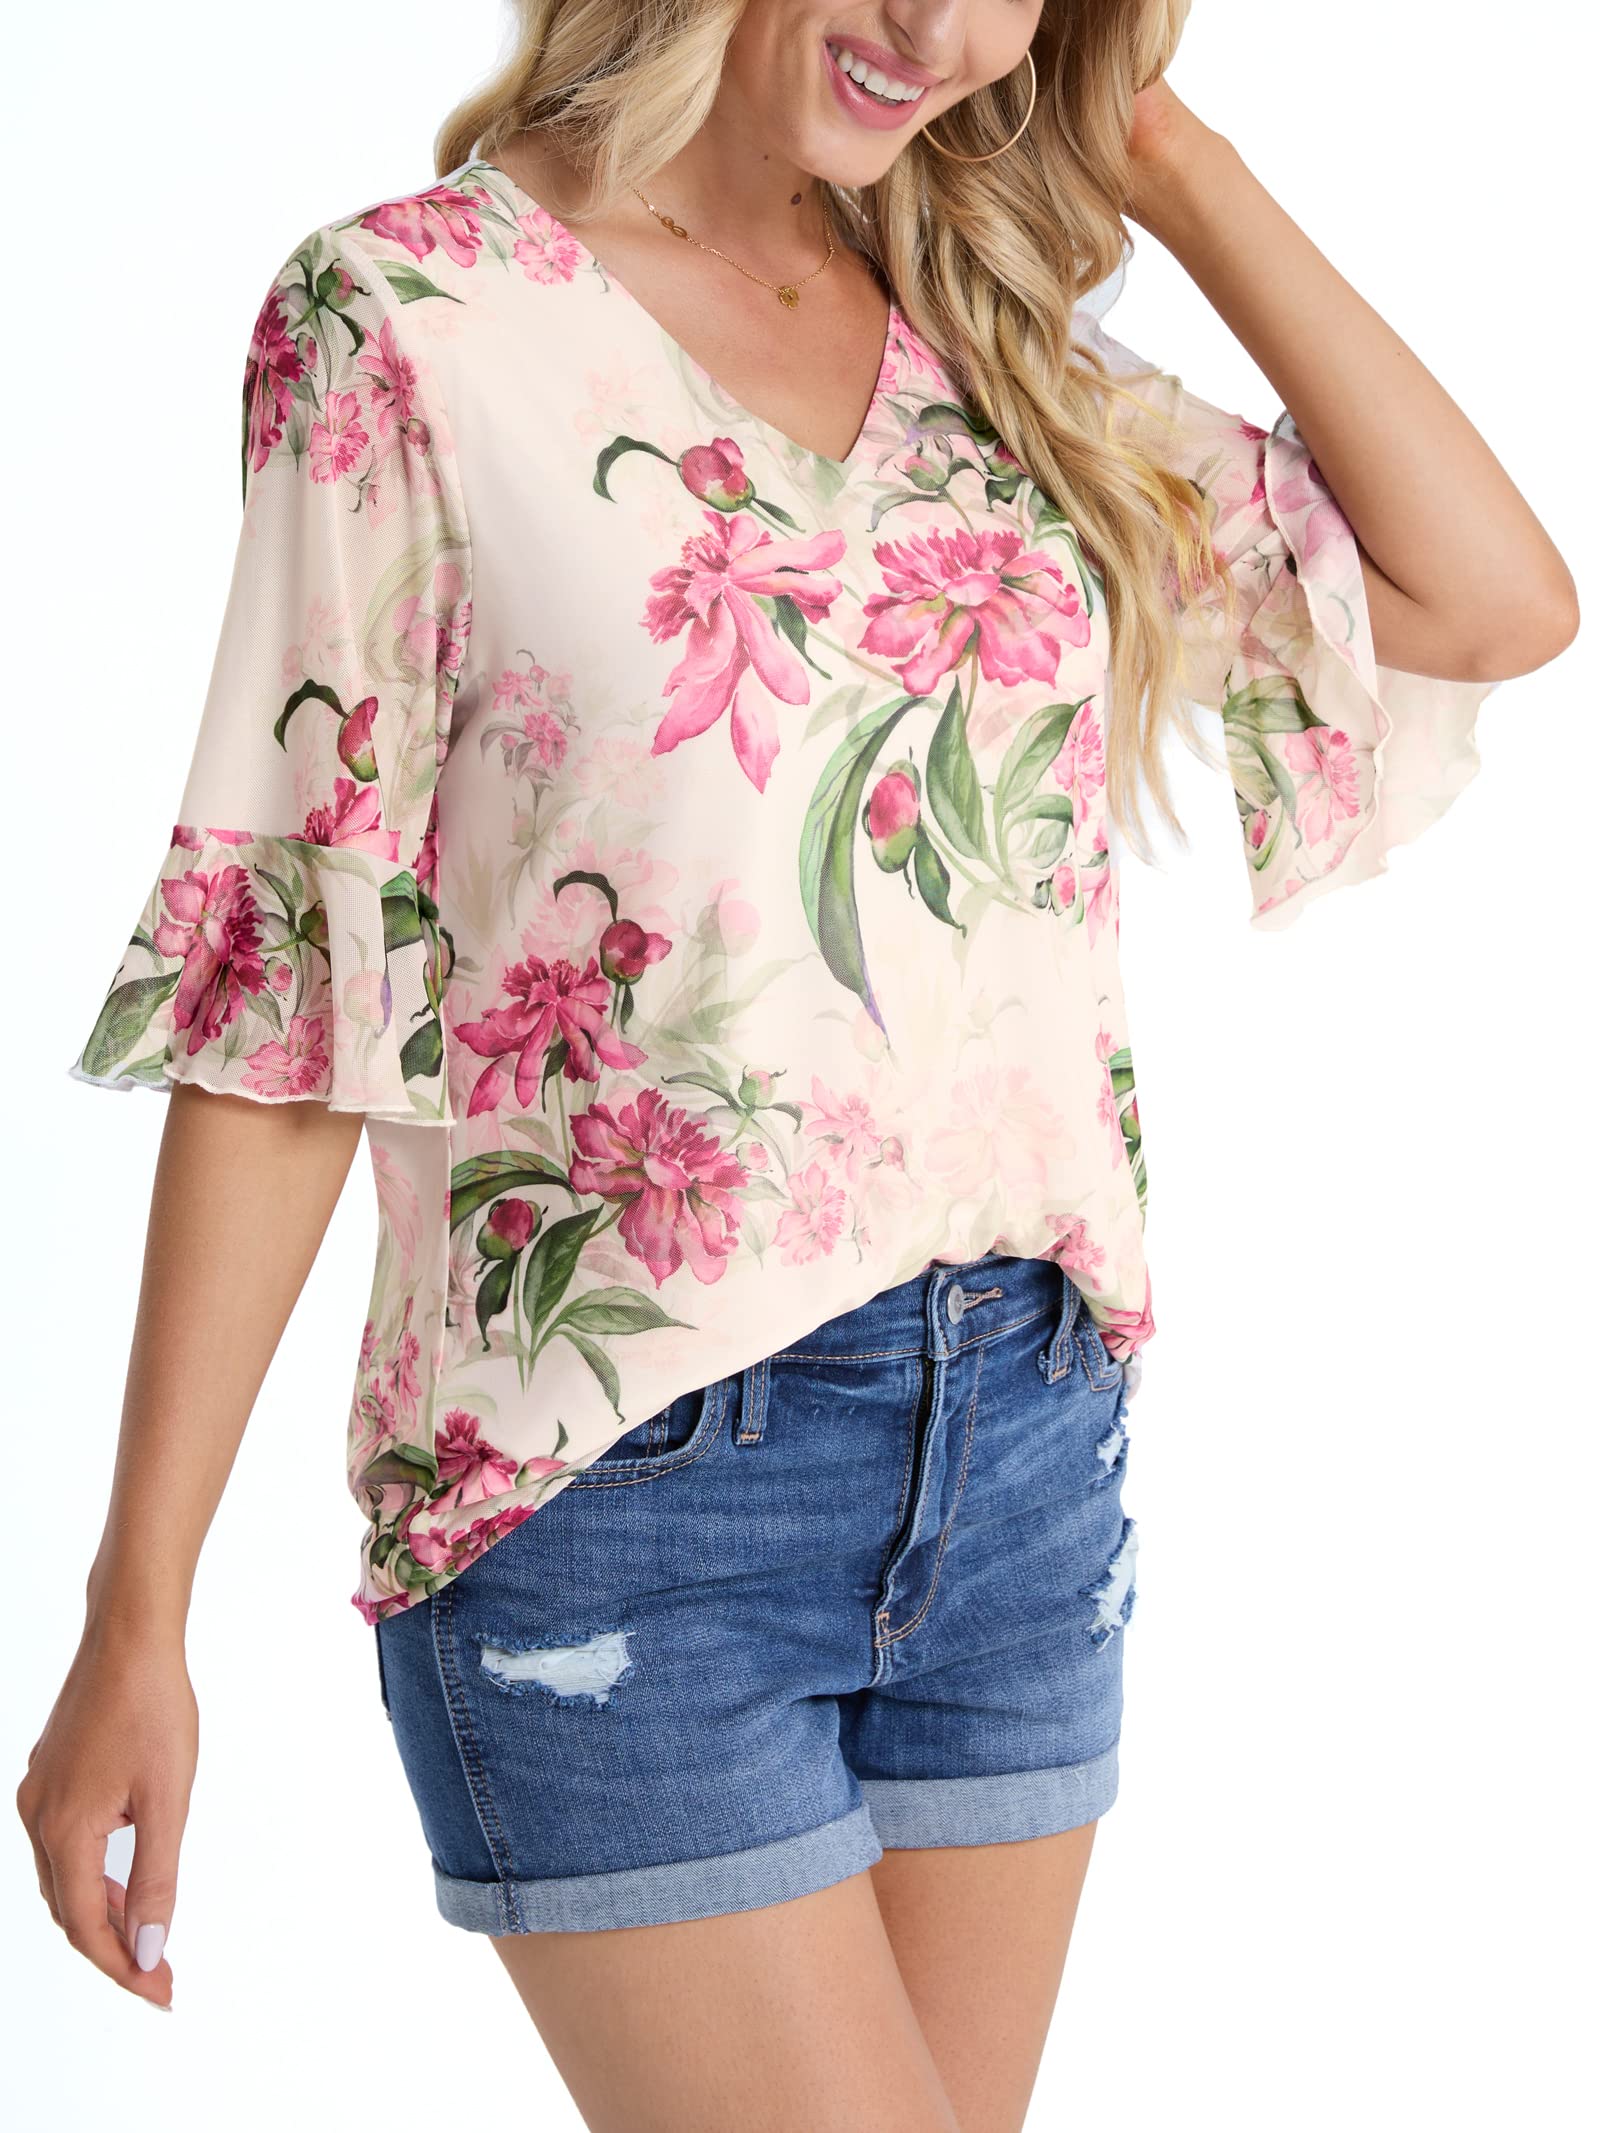 BAISHENGGT Peony Print Women's Summer Casual V Neck Ruffle Bell Sleeve Blouse Tops Loose Comfy T Shirt